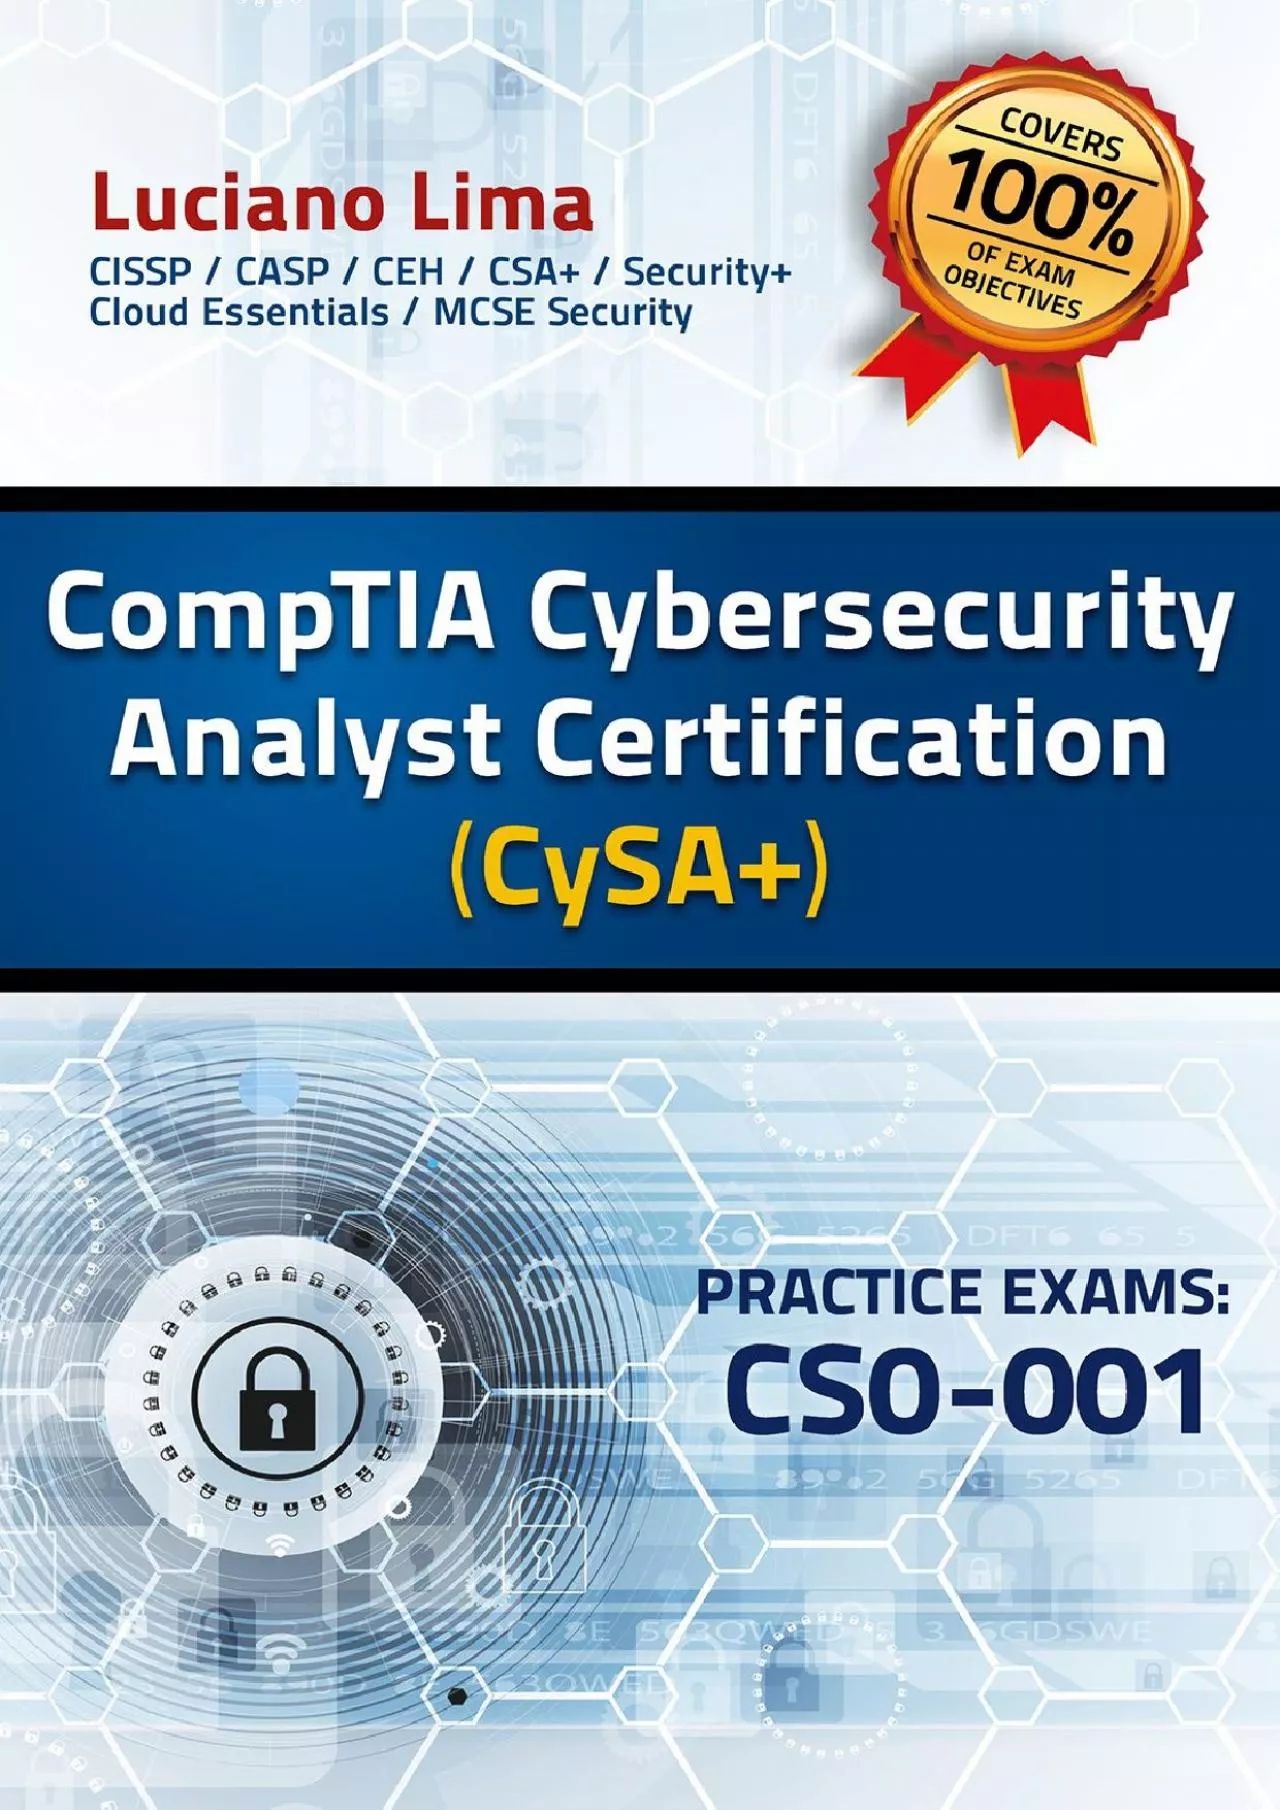 [BEST]-CompTIA Cybersecurity Analyst (CySA+) Certification Practice Exams - CS0-001